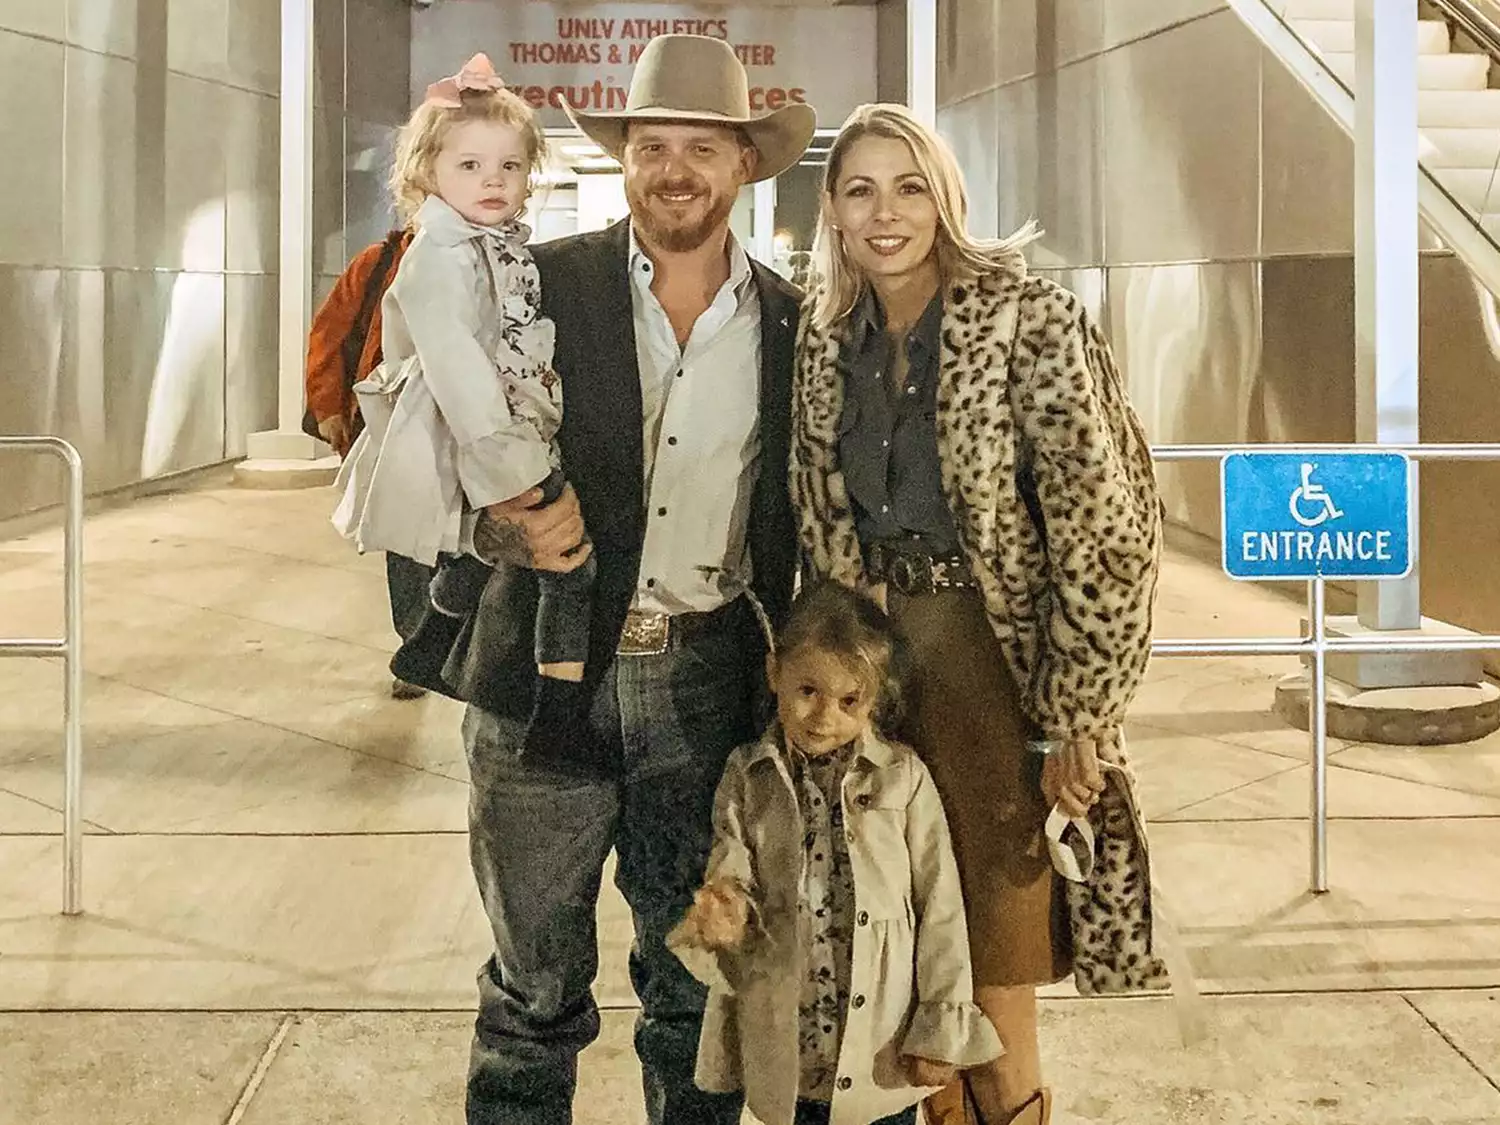 Cody Johnson with his wife Brandi and their two daughters